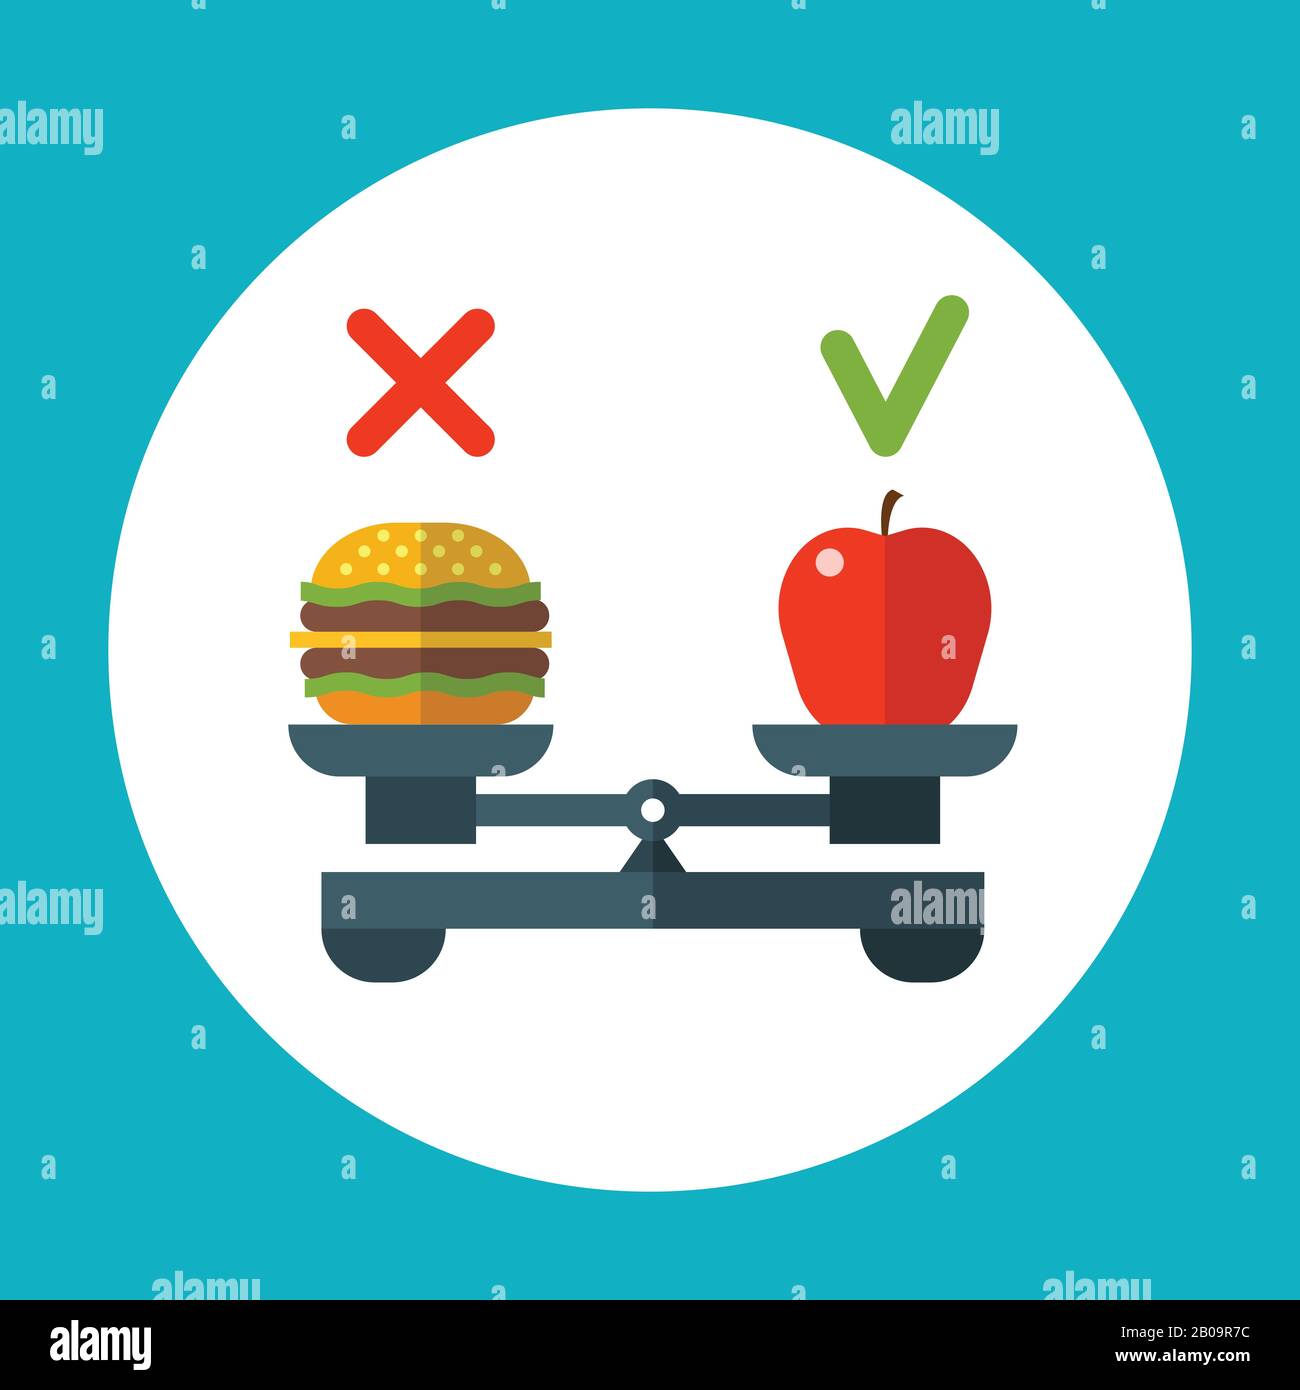 https://c8.alamy.com/comp/2B09R7C/diet-food-balance-healthy-vector-concept-with-apple-and-hamburger-on-scales-burger-or-apple-illustration-of-choice-red-apple-and-fast-food-2B09R7C.jpg